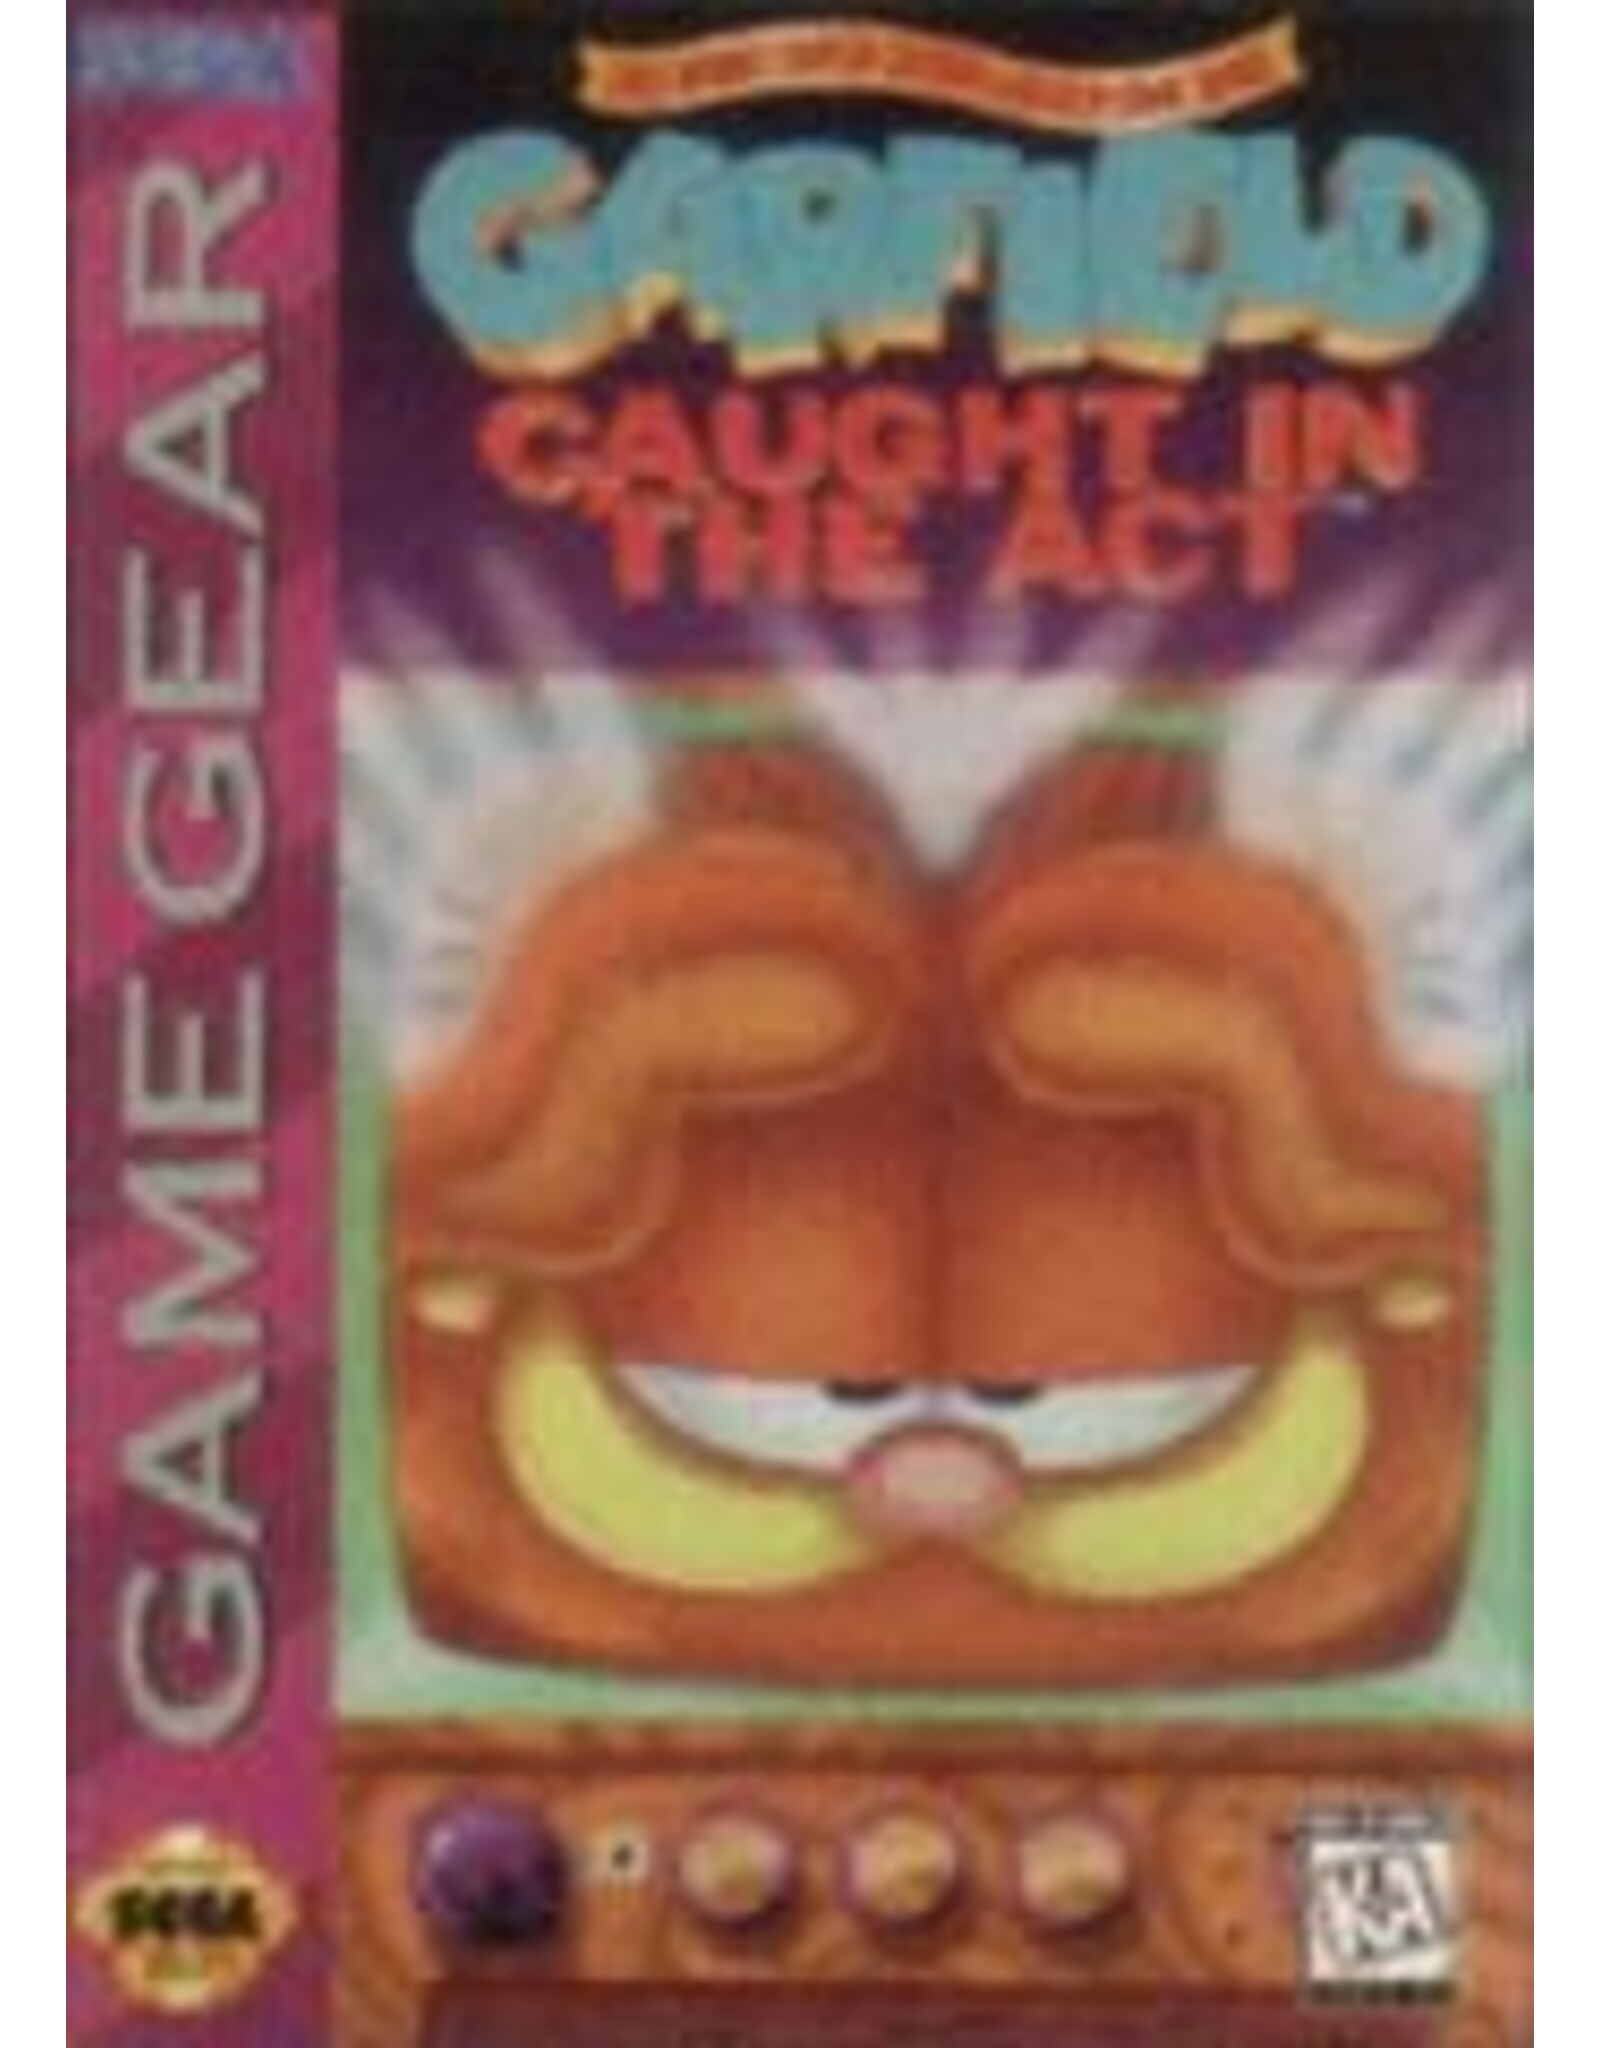 Sega Game Gear Garfield Caught in the Act (Cart Only)